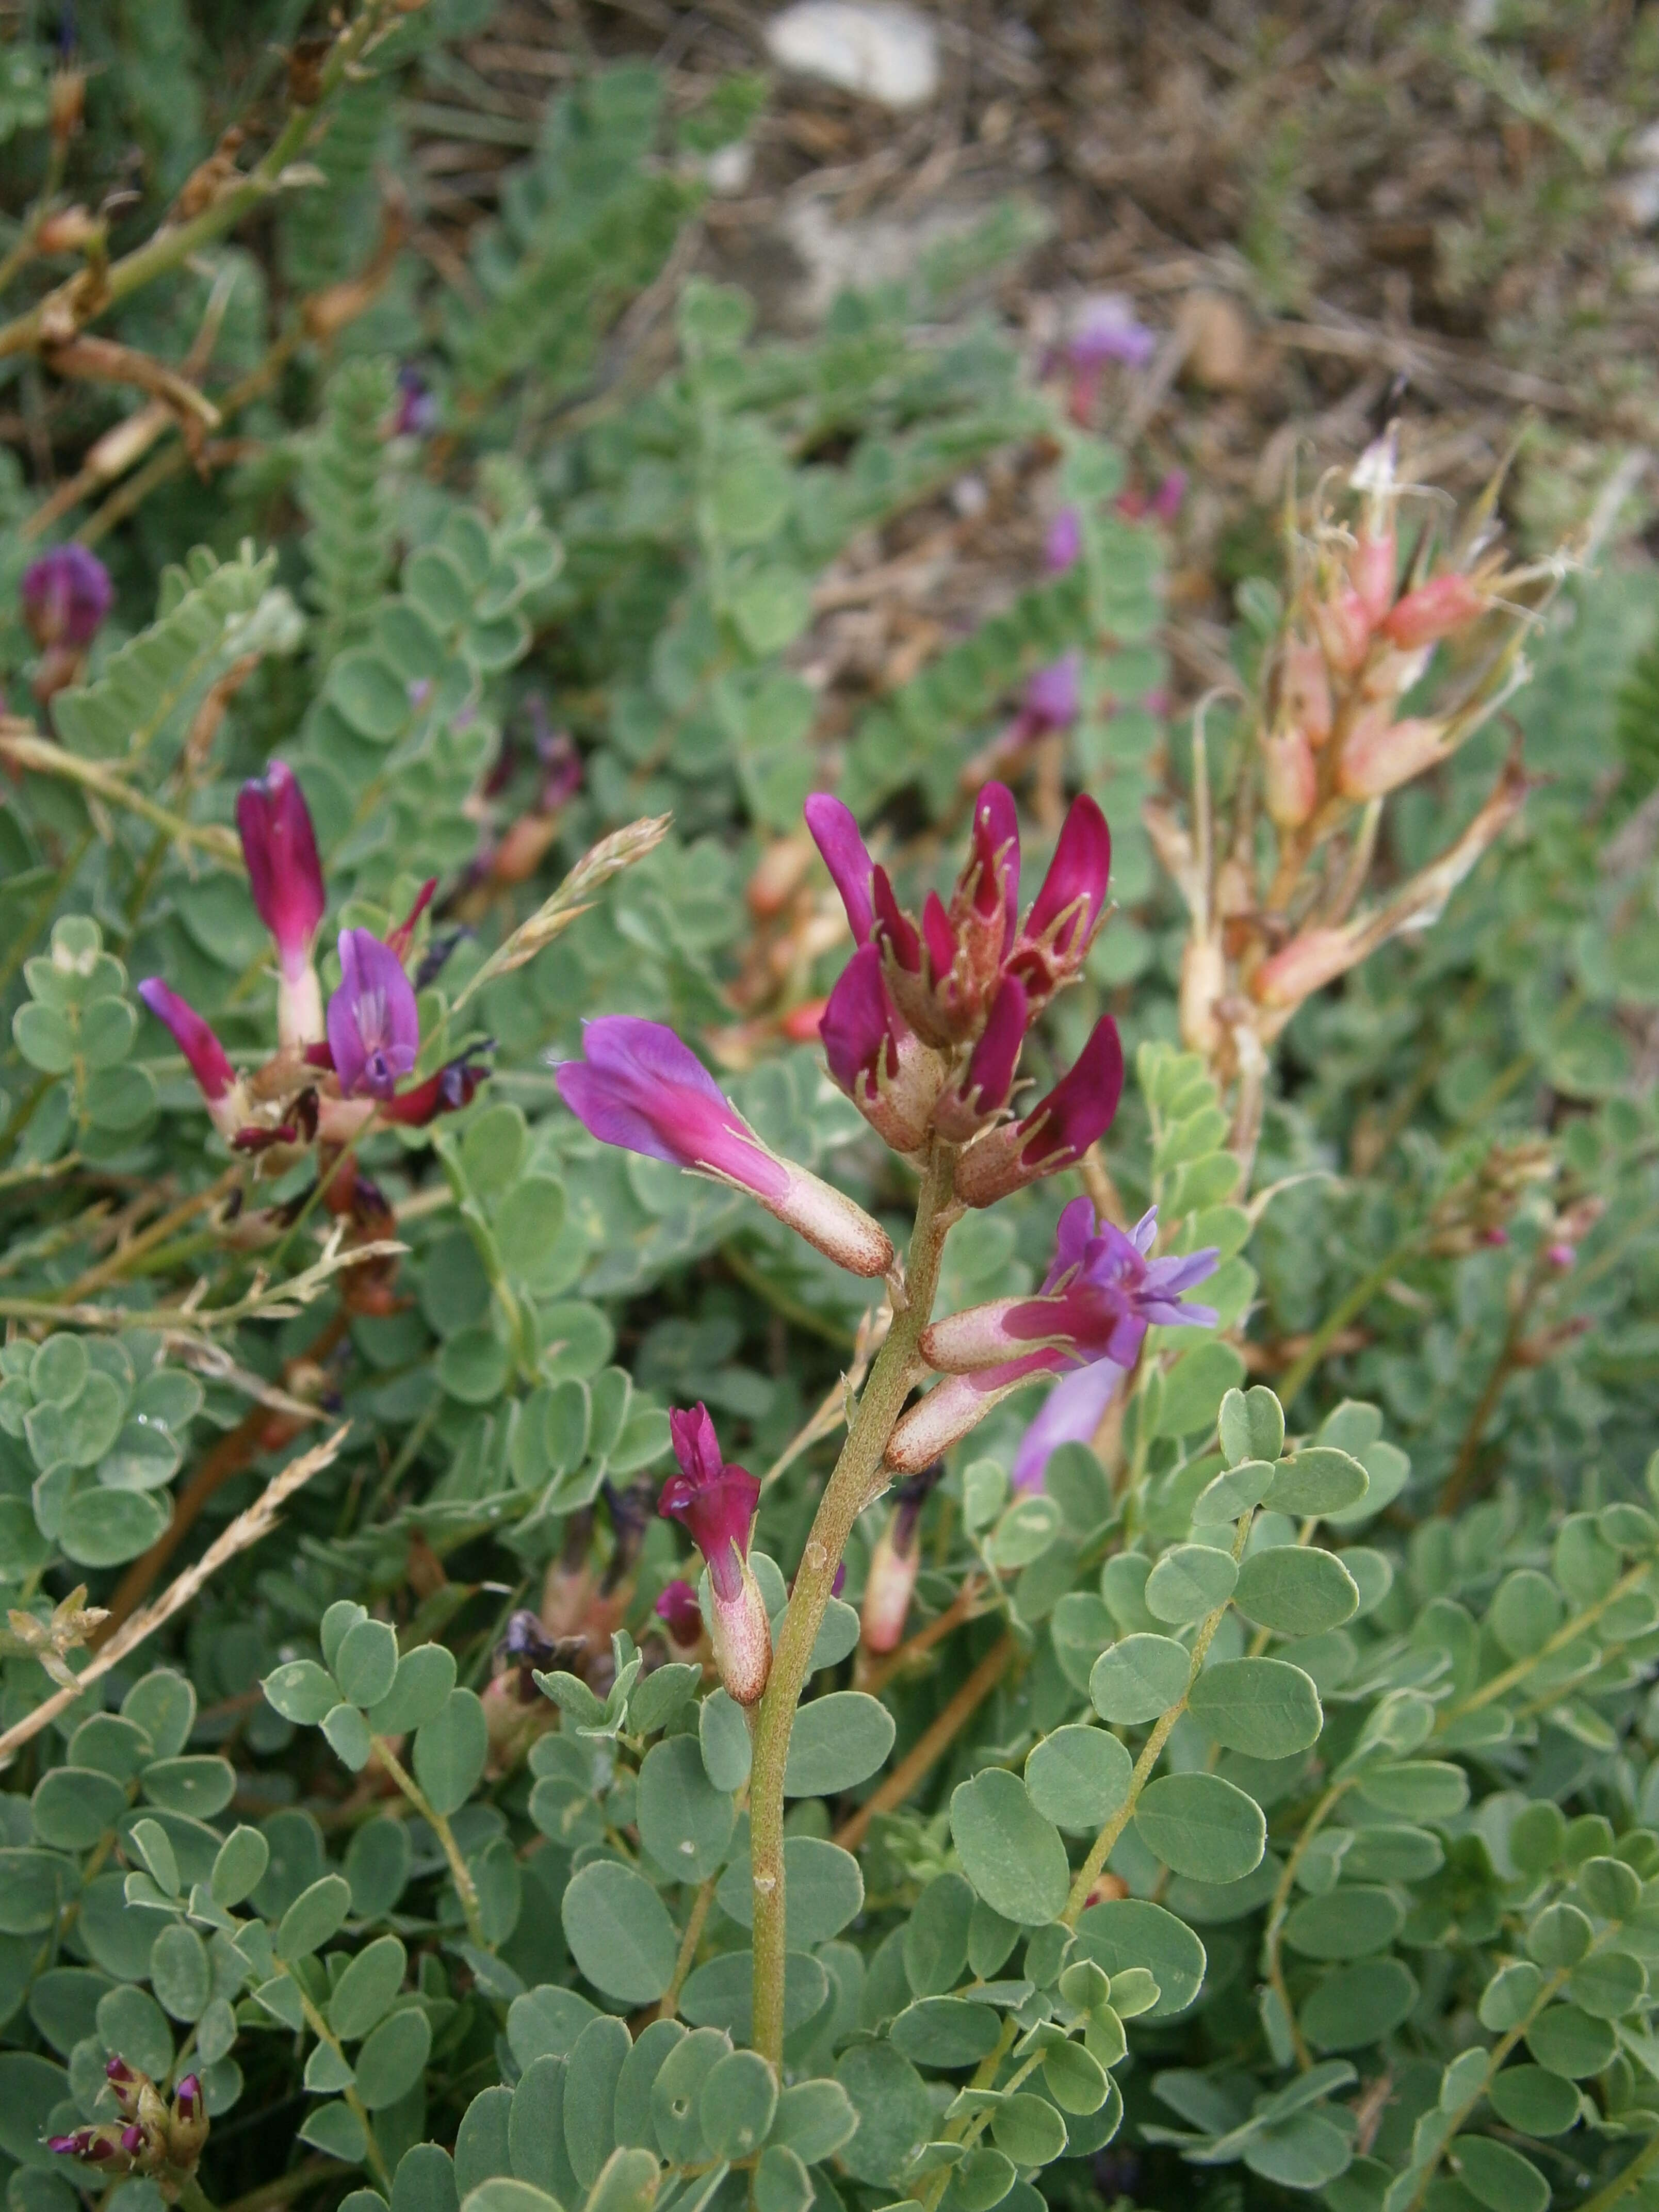 Image of Montpellier milkvetch